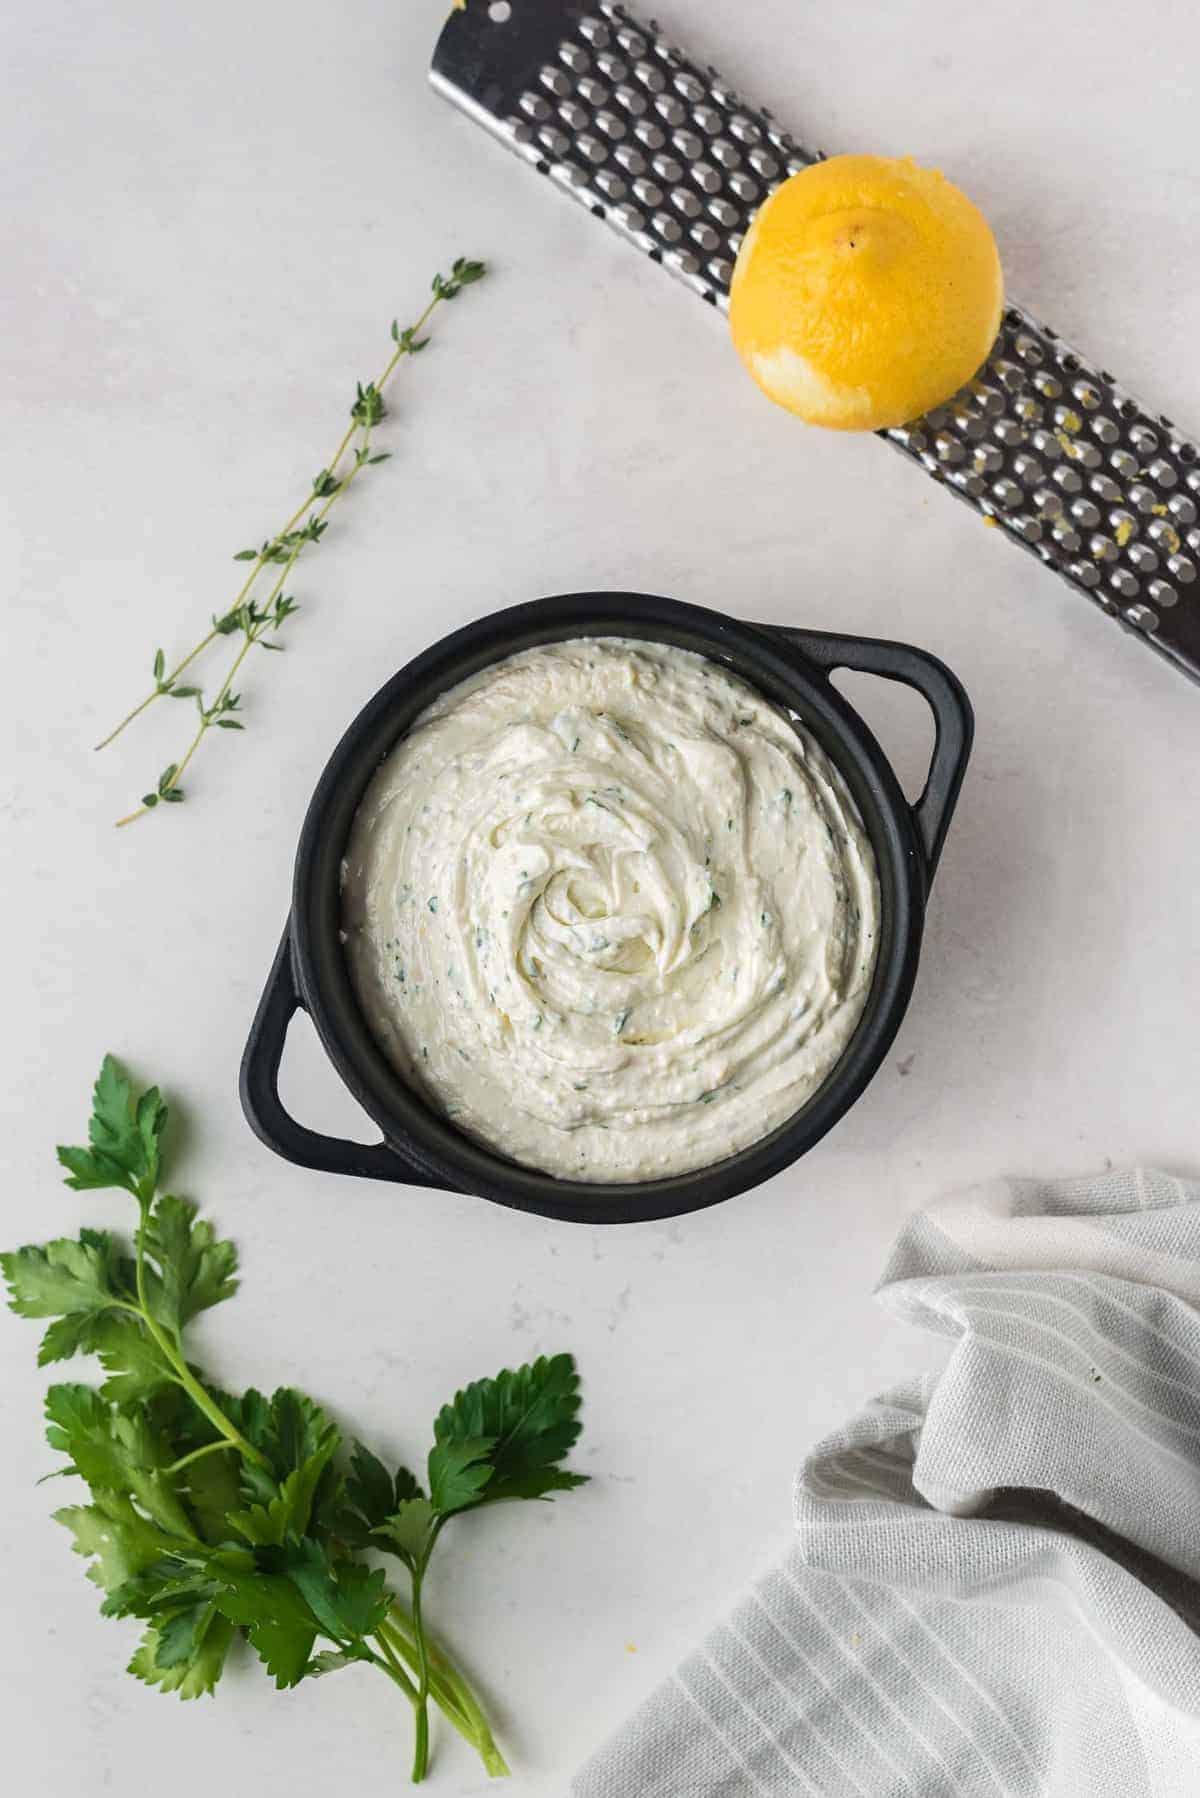 Unbaked goat cheese spread in a black baking dish.